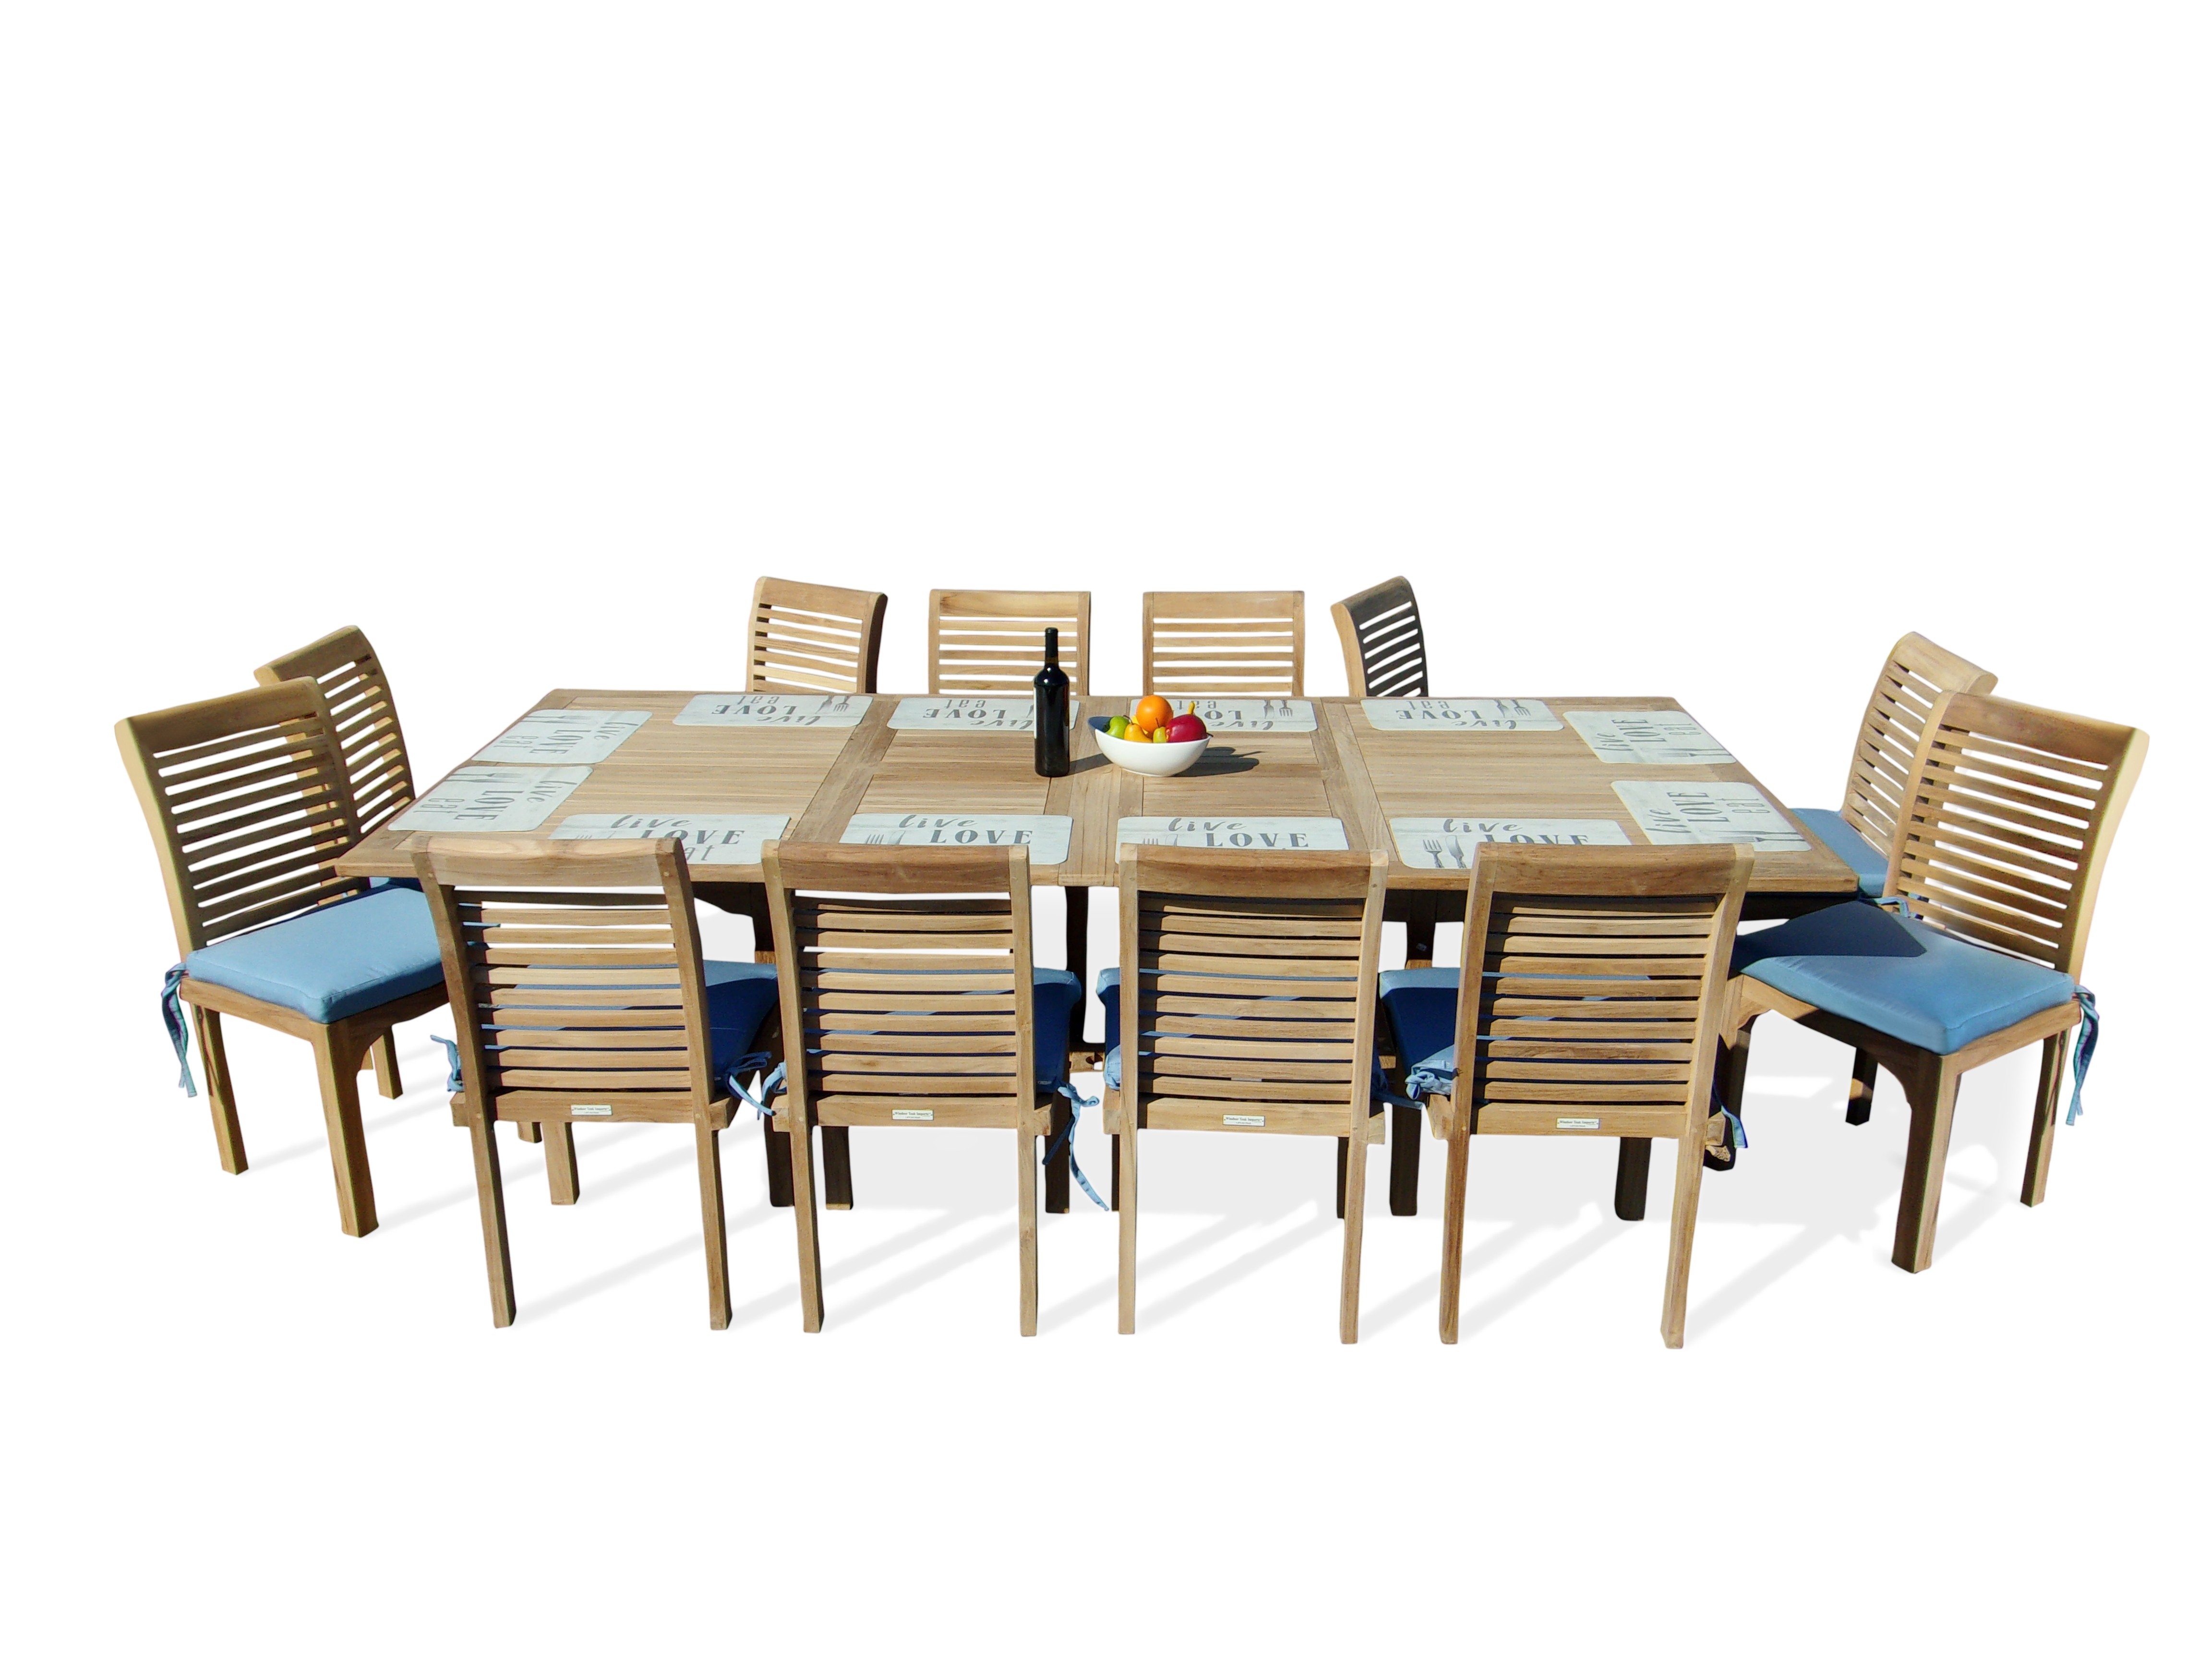  Buckingham Premium Teak Extra WIDE 108" x 51" Double Leaf Rect Extension Table...w12 Stacking Armless Chairs ..makes 3 Different Size Tables